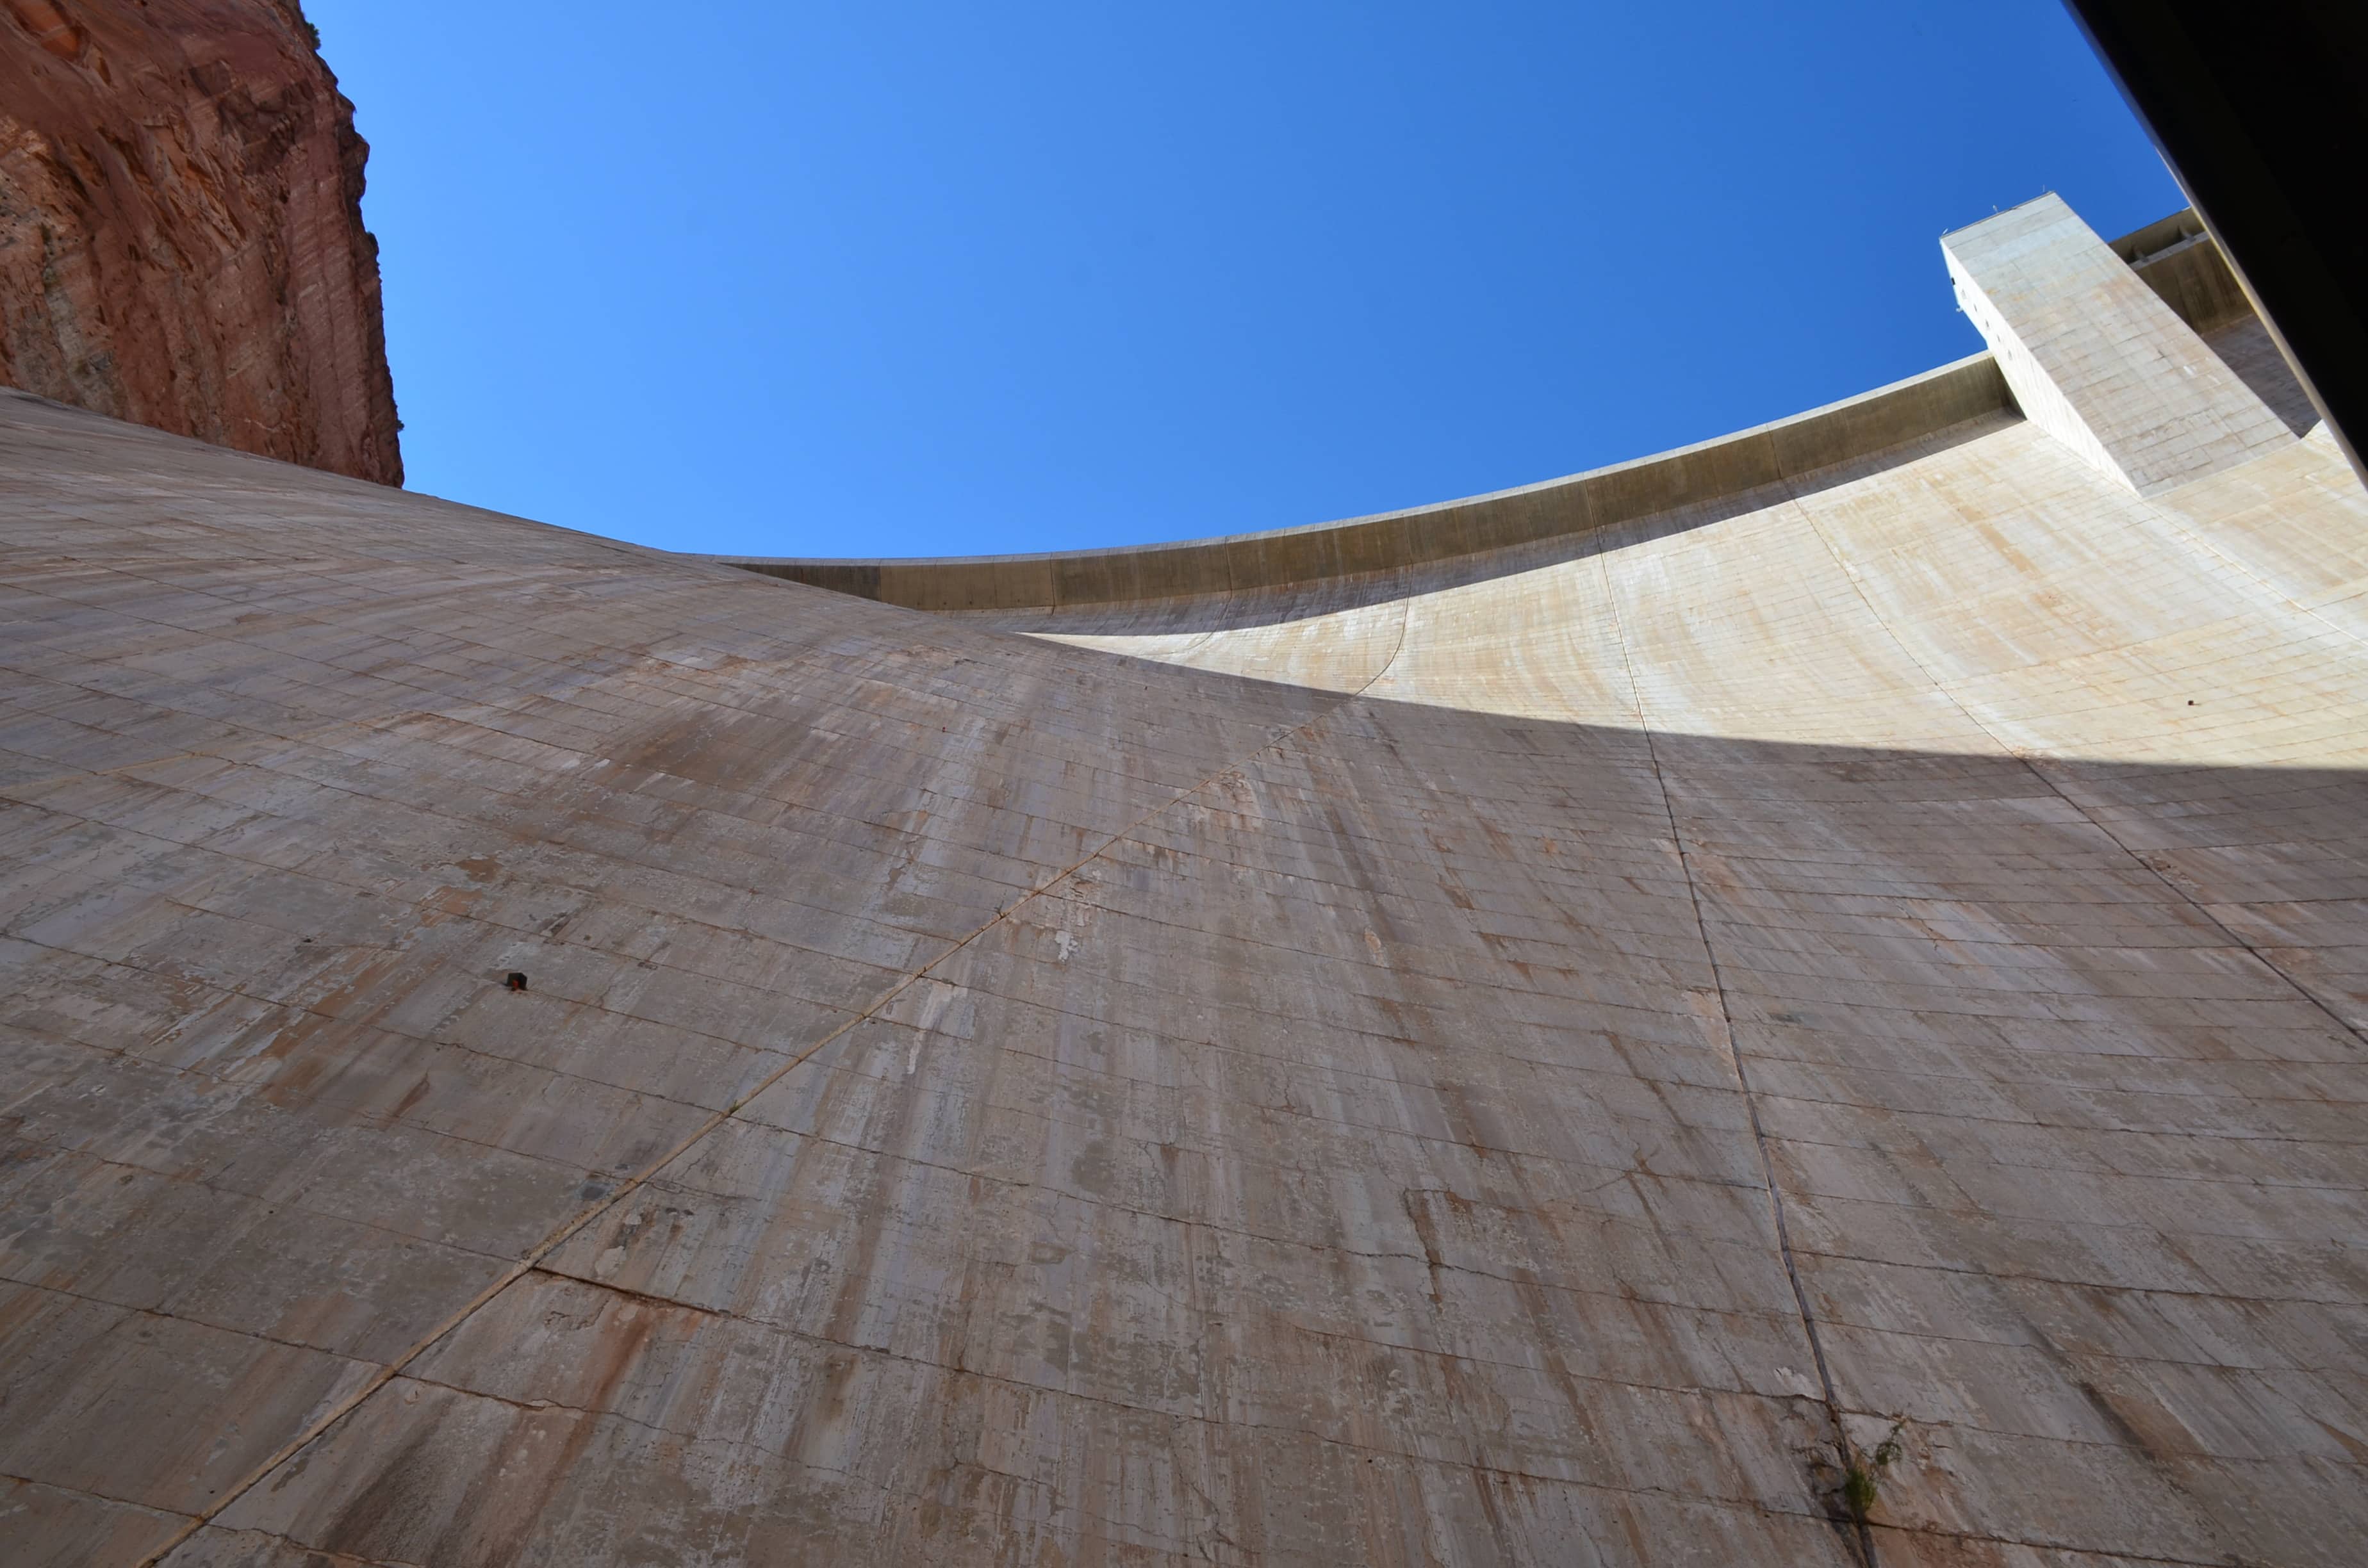 Looking up the face of Glen Canyon Dam at Glen Canyon National Recreation Area in Arizona